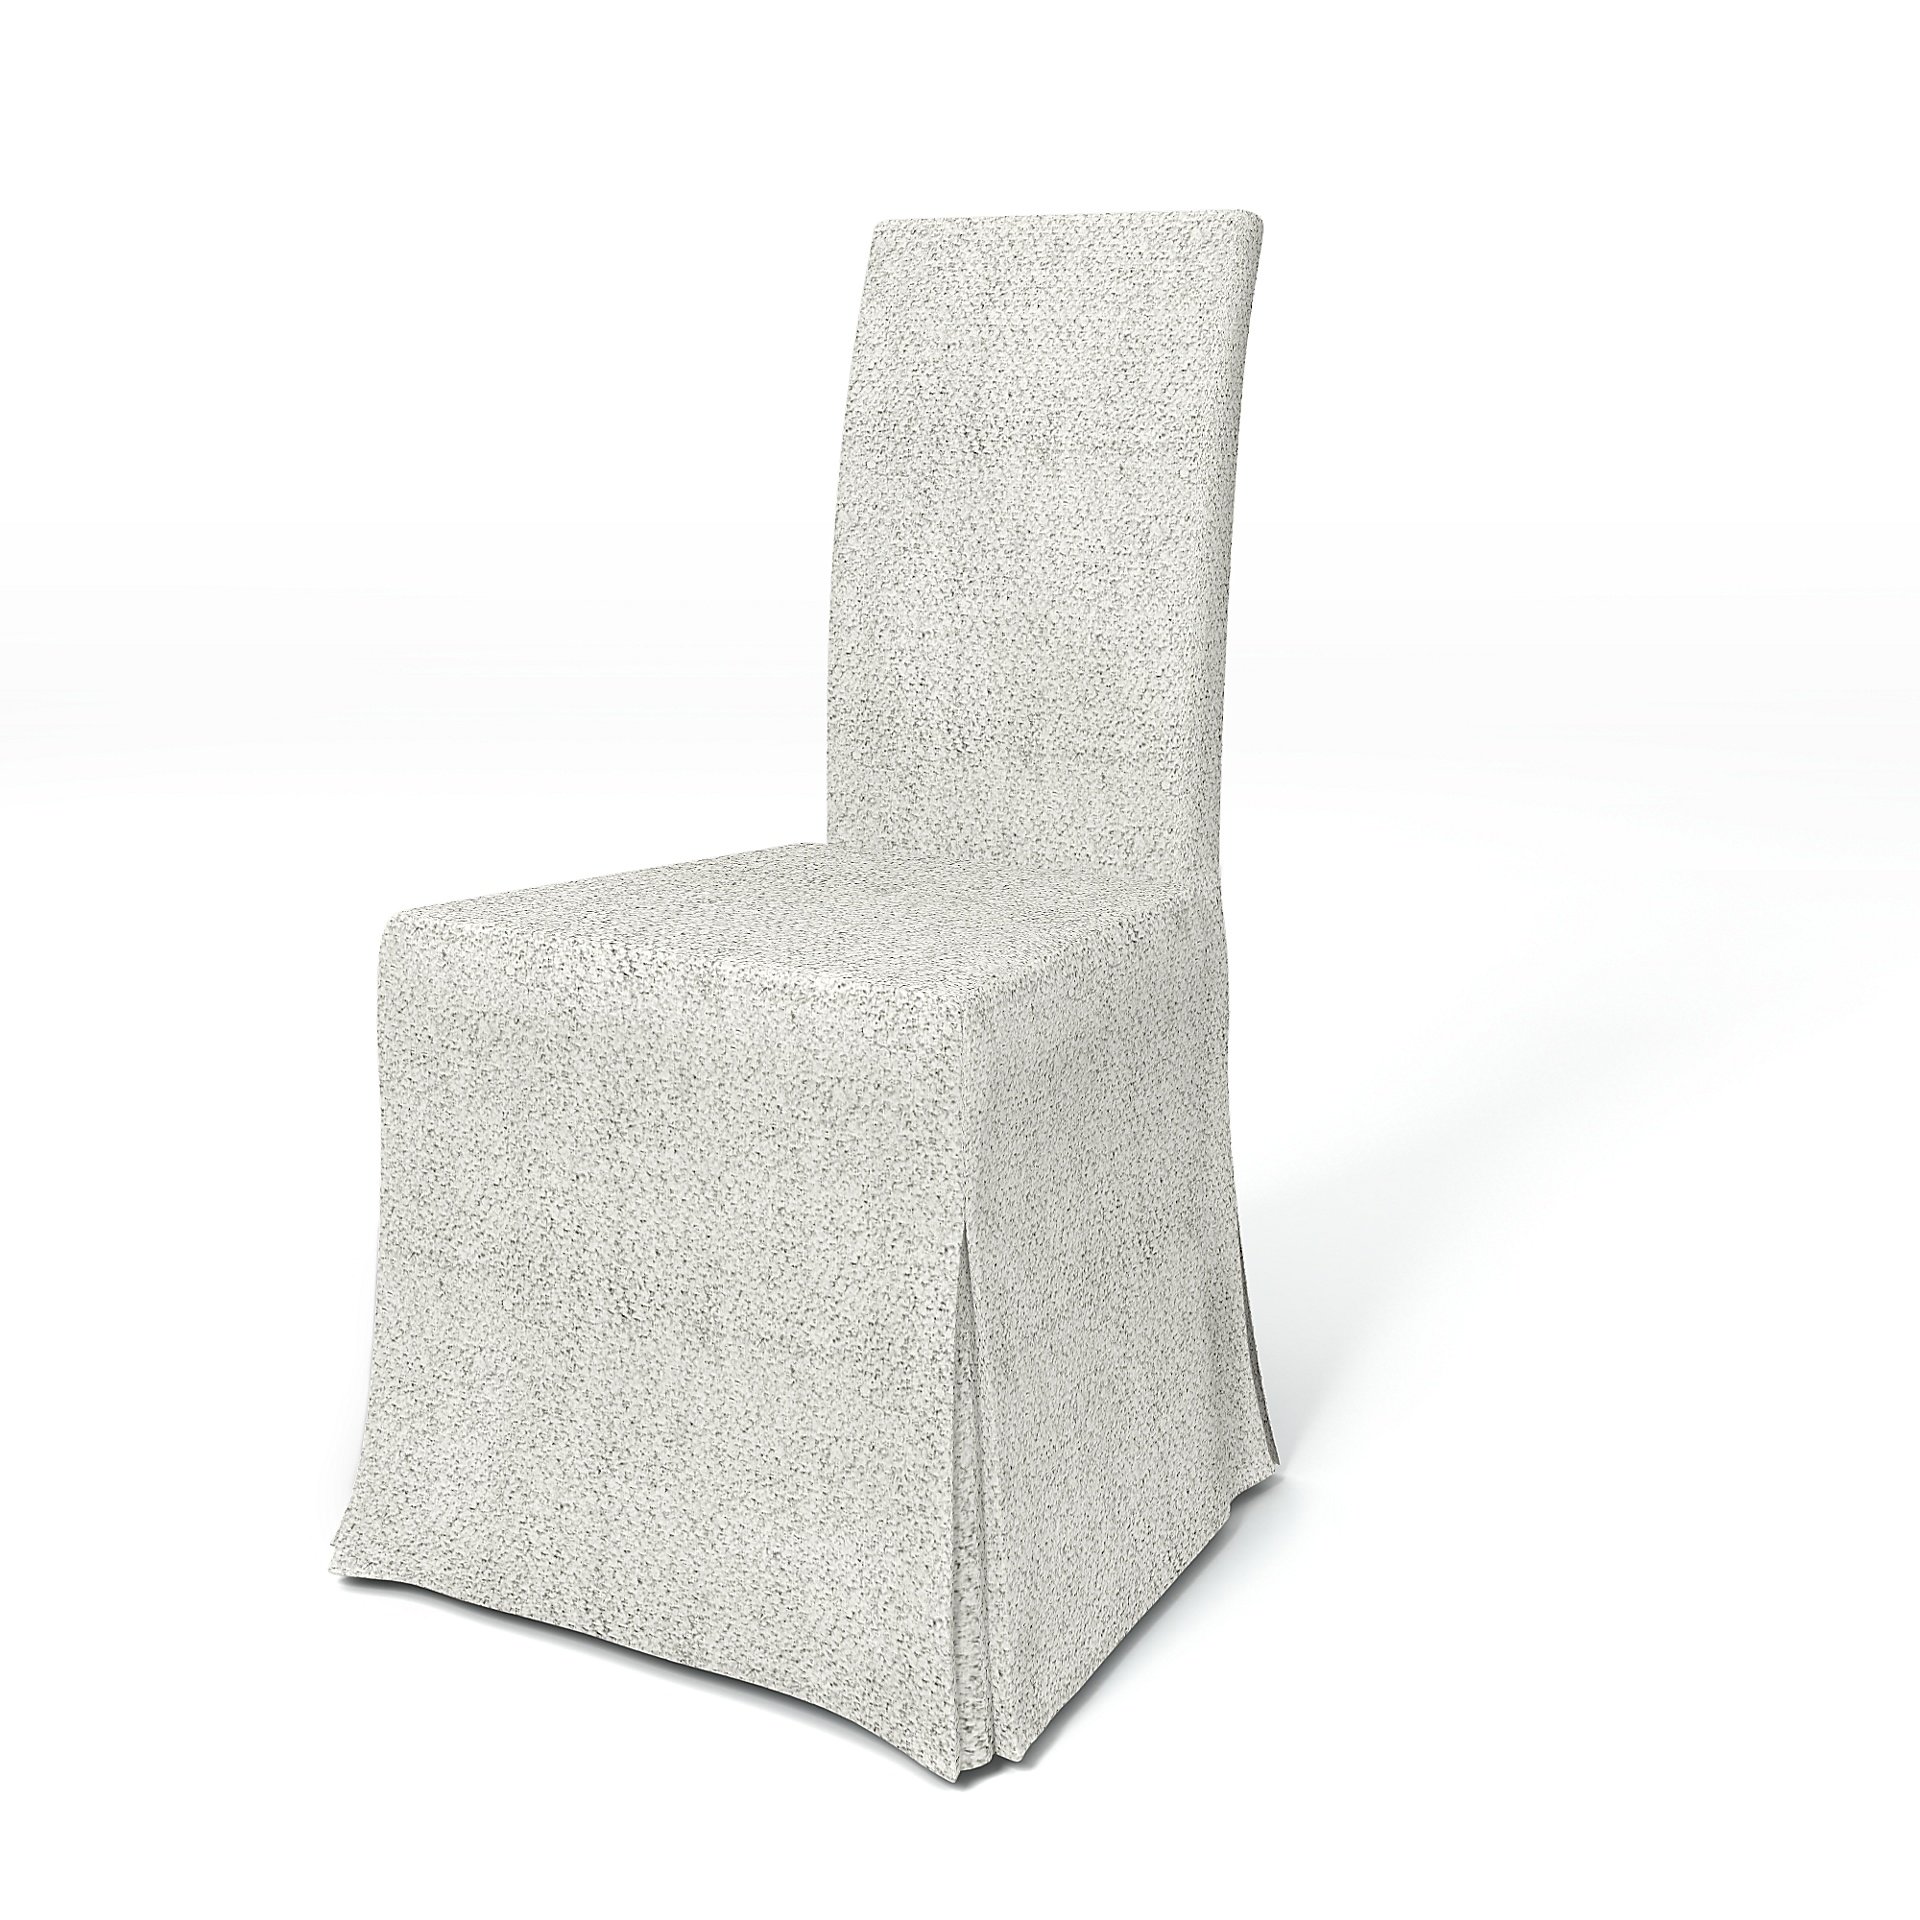 IKEA - Harry Dining Chair Cover, Ivory, Boucle & Texture - Bemz